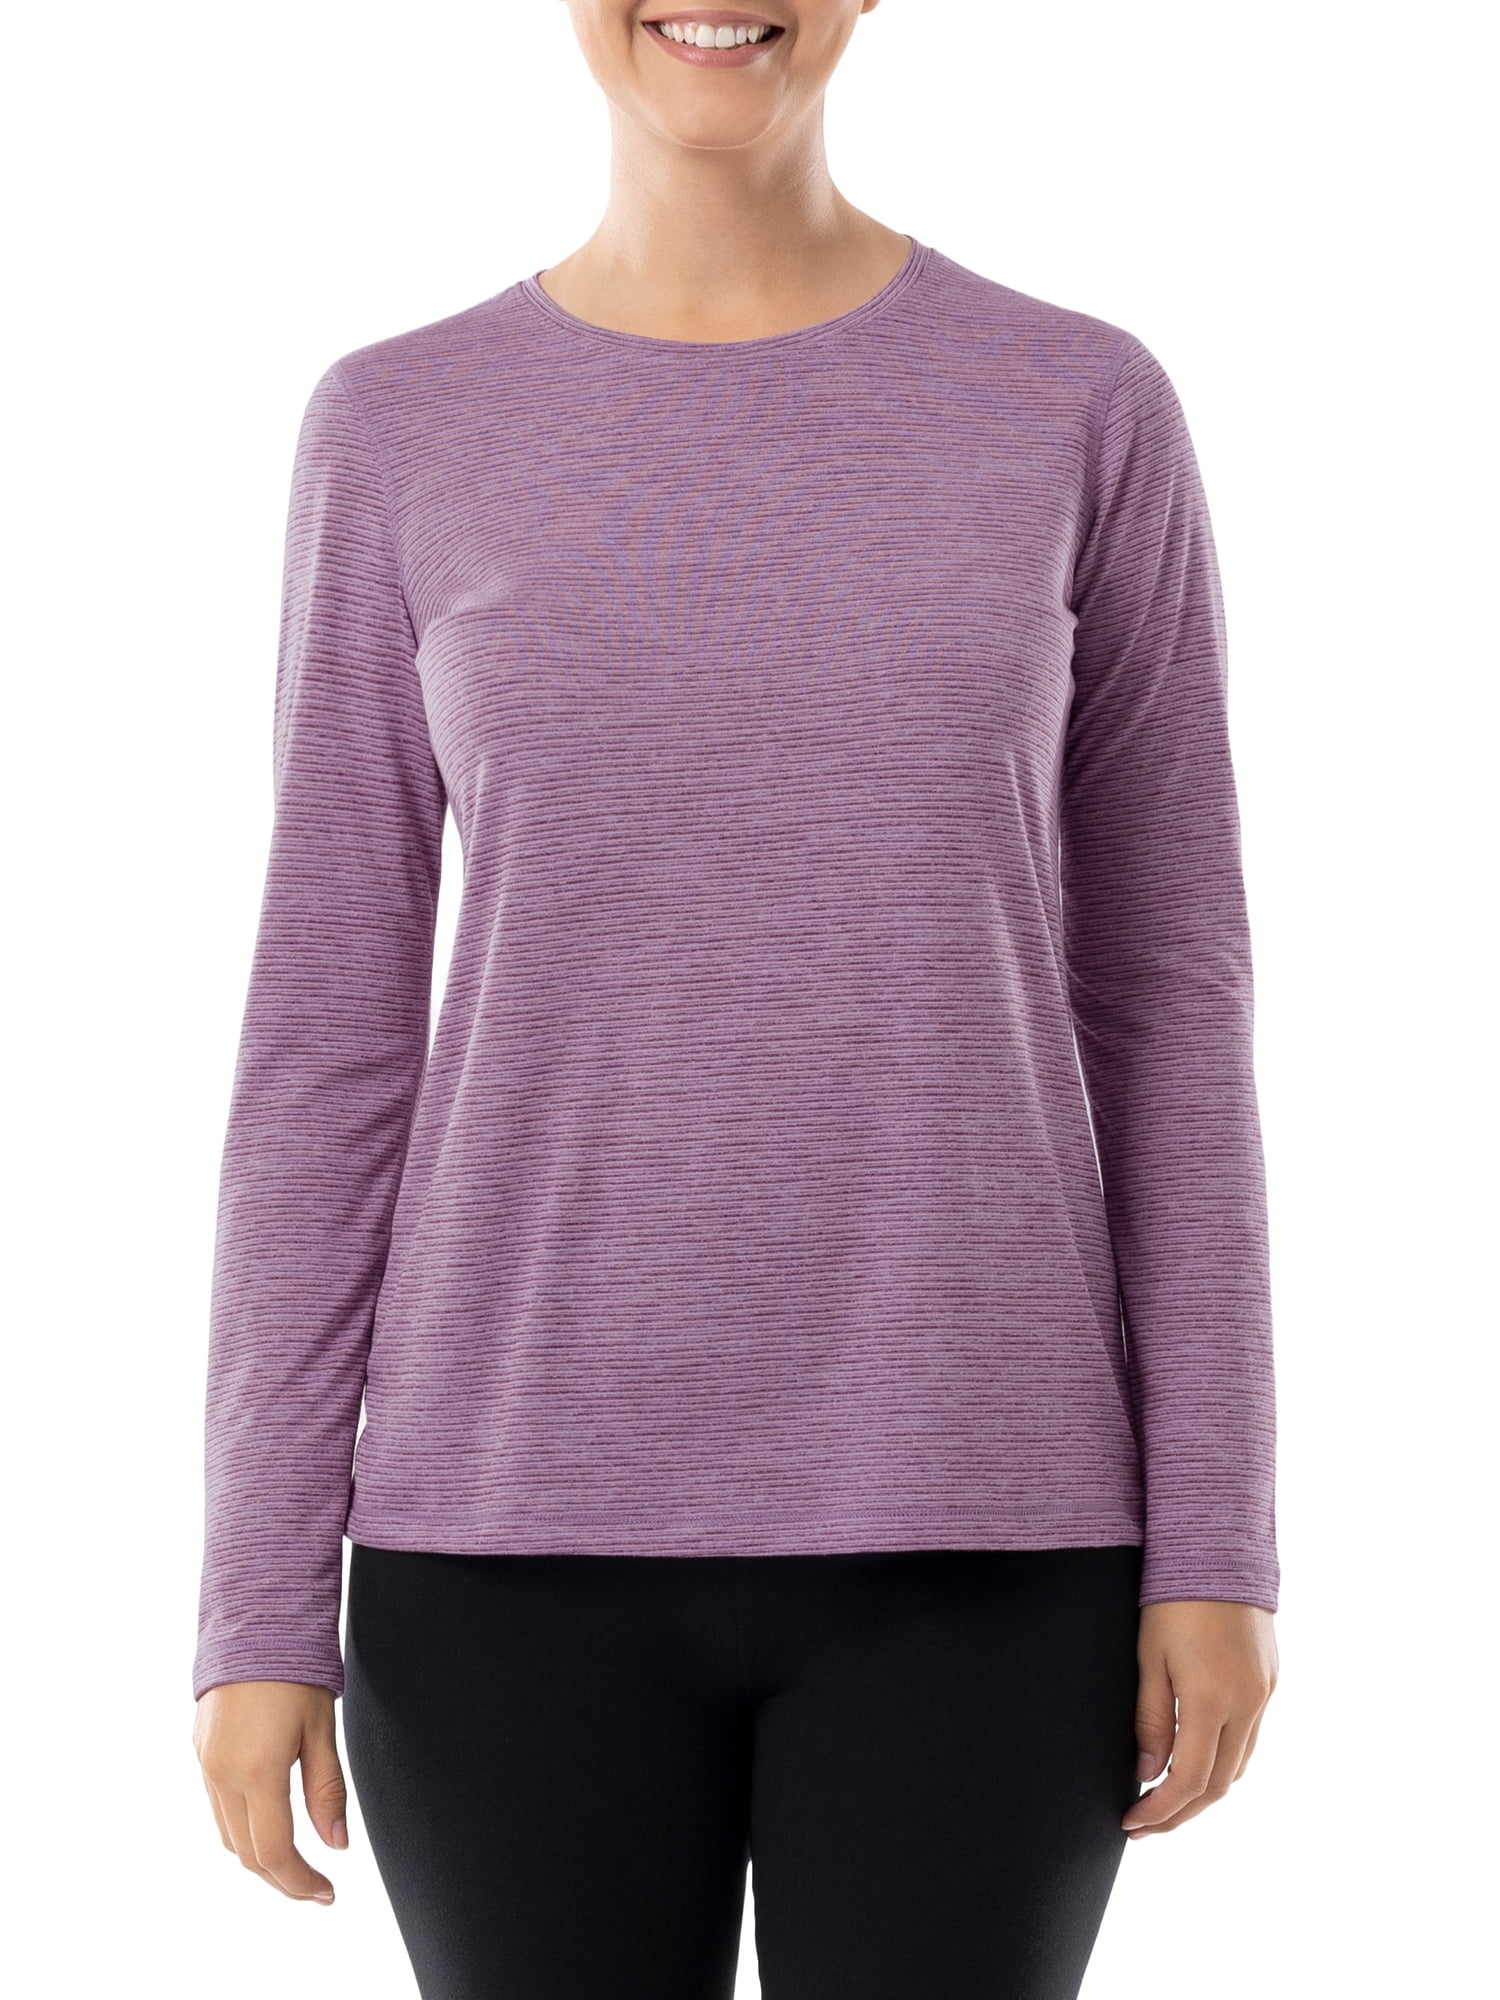 Athletic Works Women's Core Active Long Sleeve T-Shirt